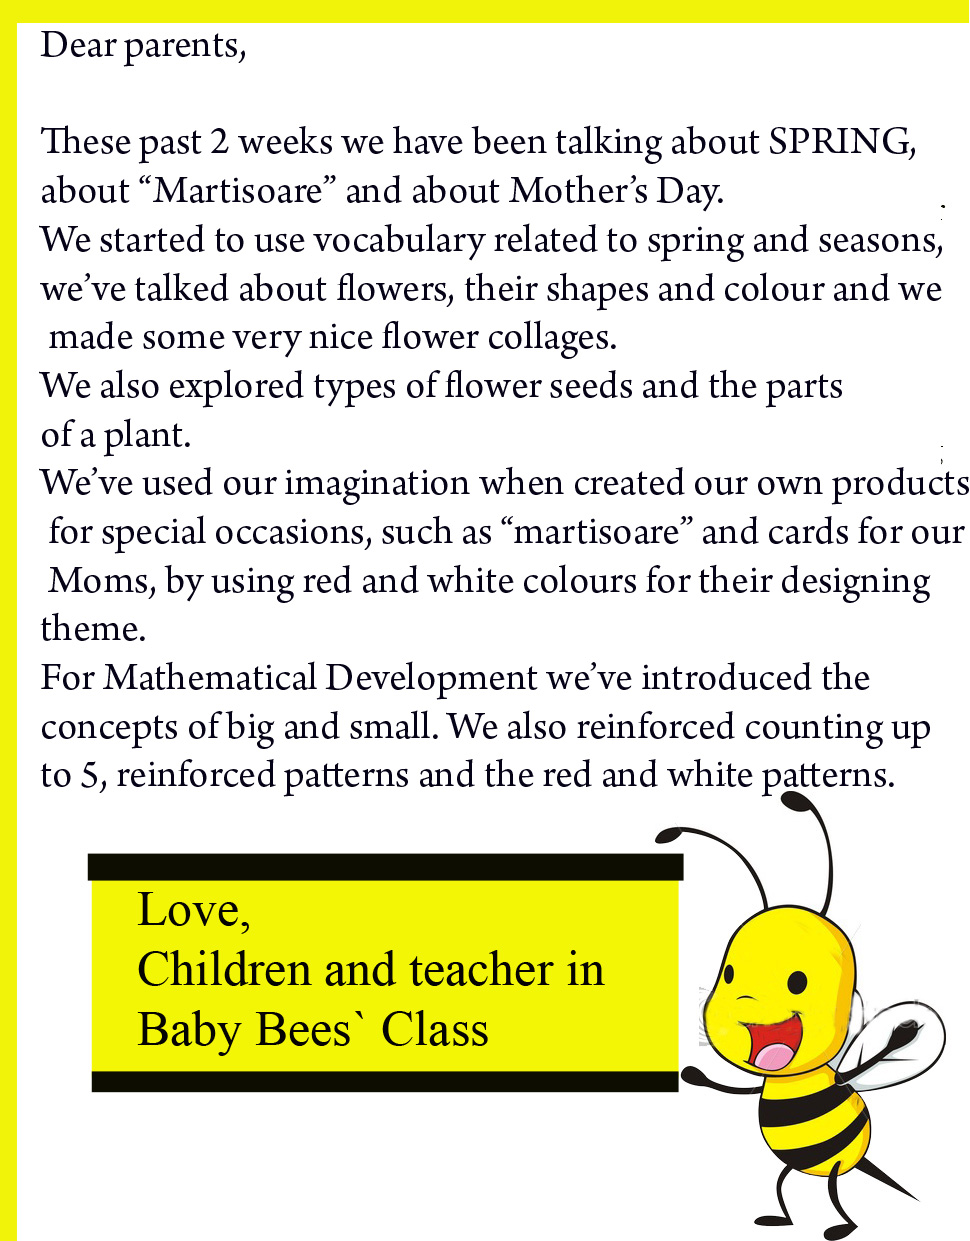 [baby+bees+letter_march.jpg]